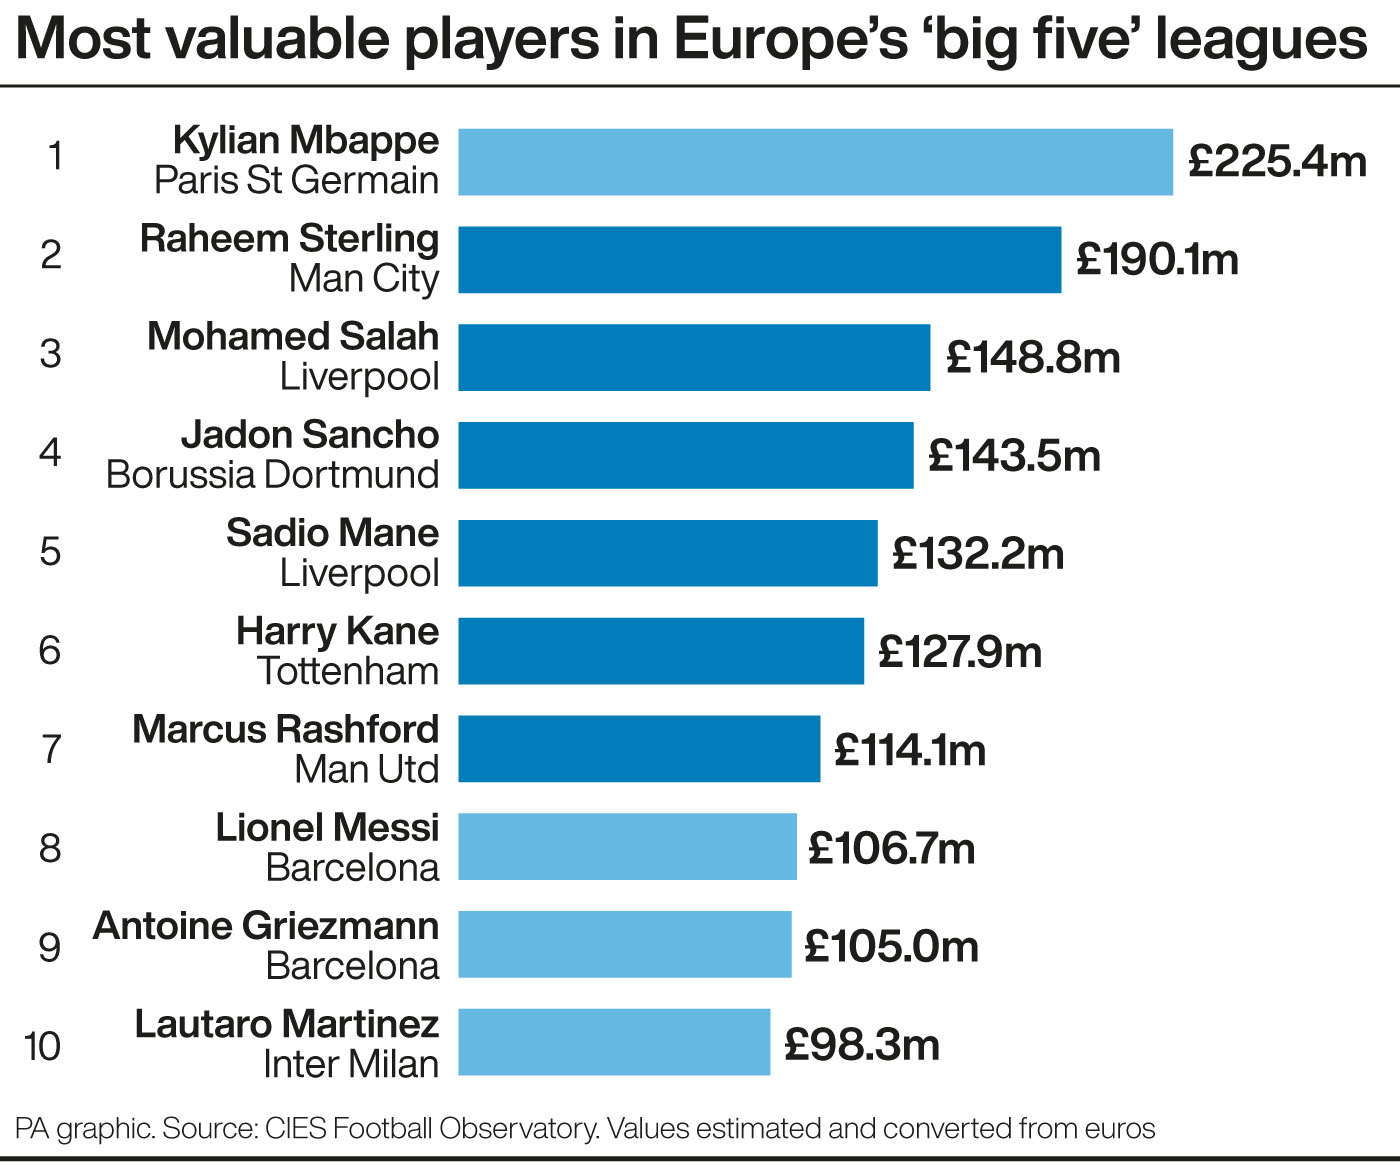 Most valuable players in Europe's 'big five' leagues (CIES)